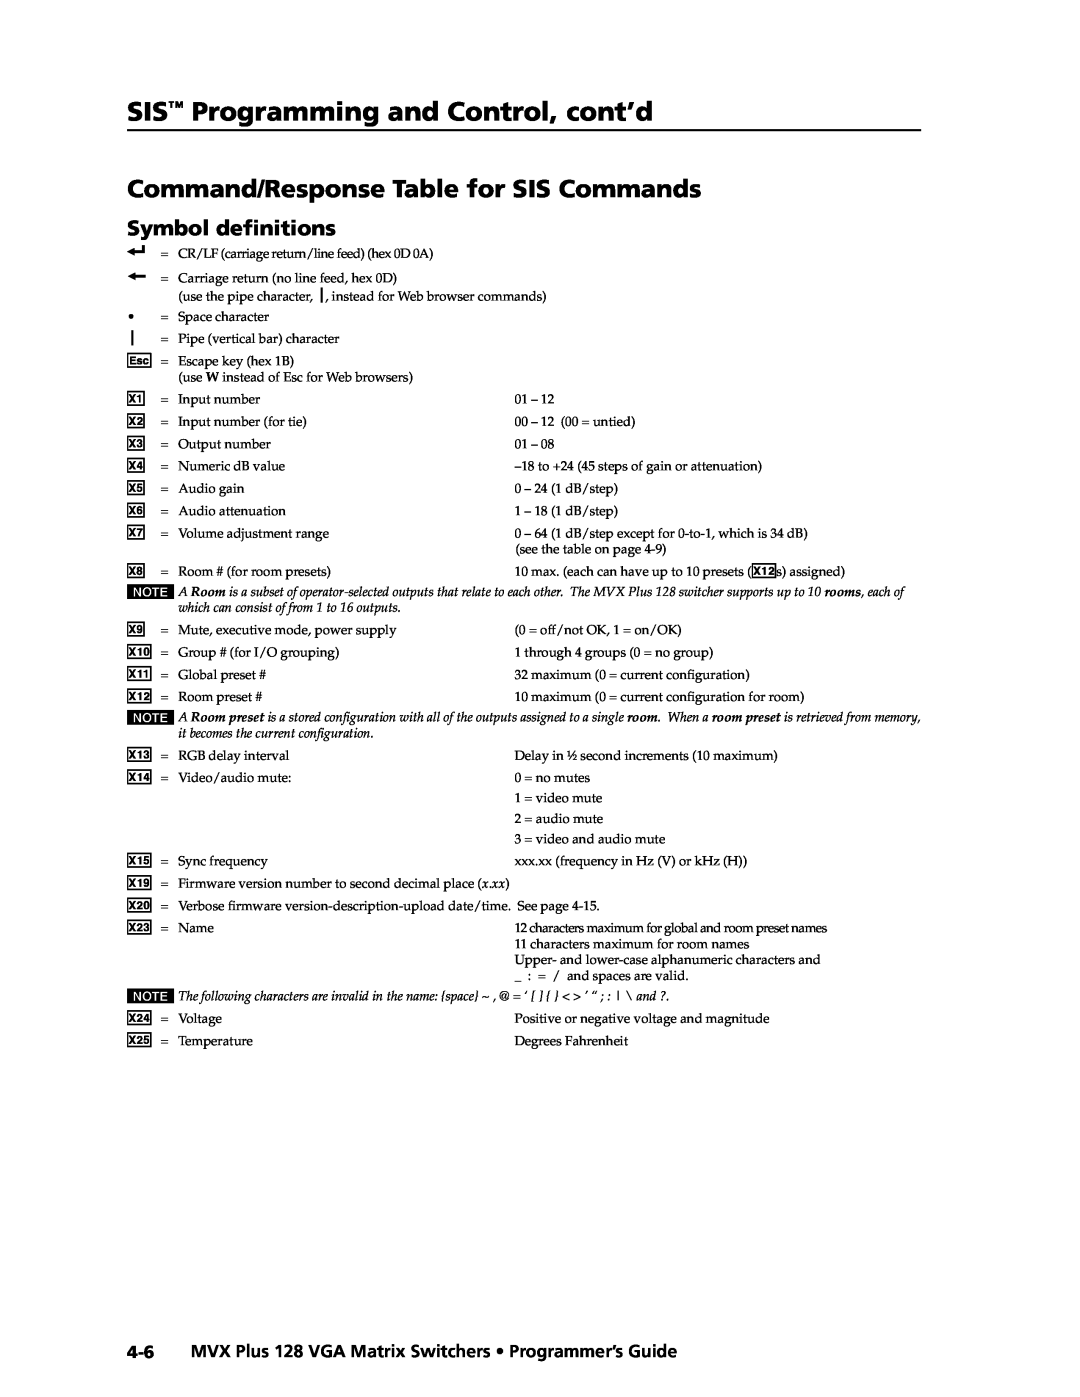 Extron electronic MVX PLUS 128 manual Command/Response Table for SIS Commands, Symbol deﬁnitions 